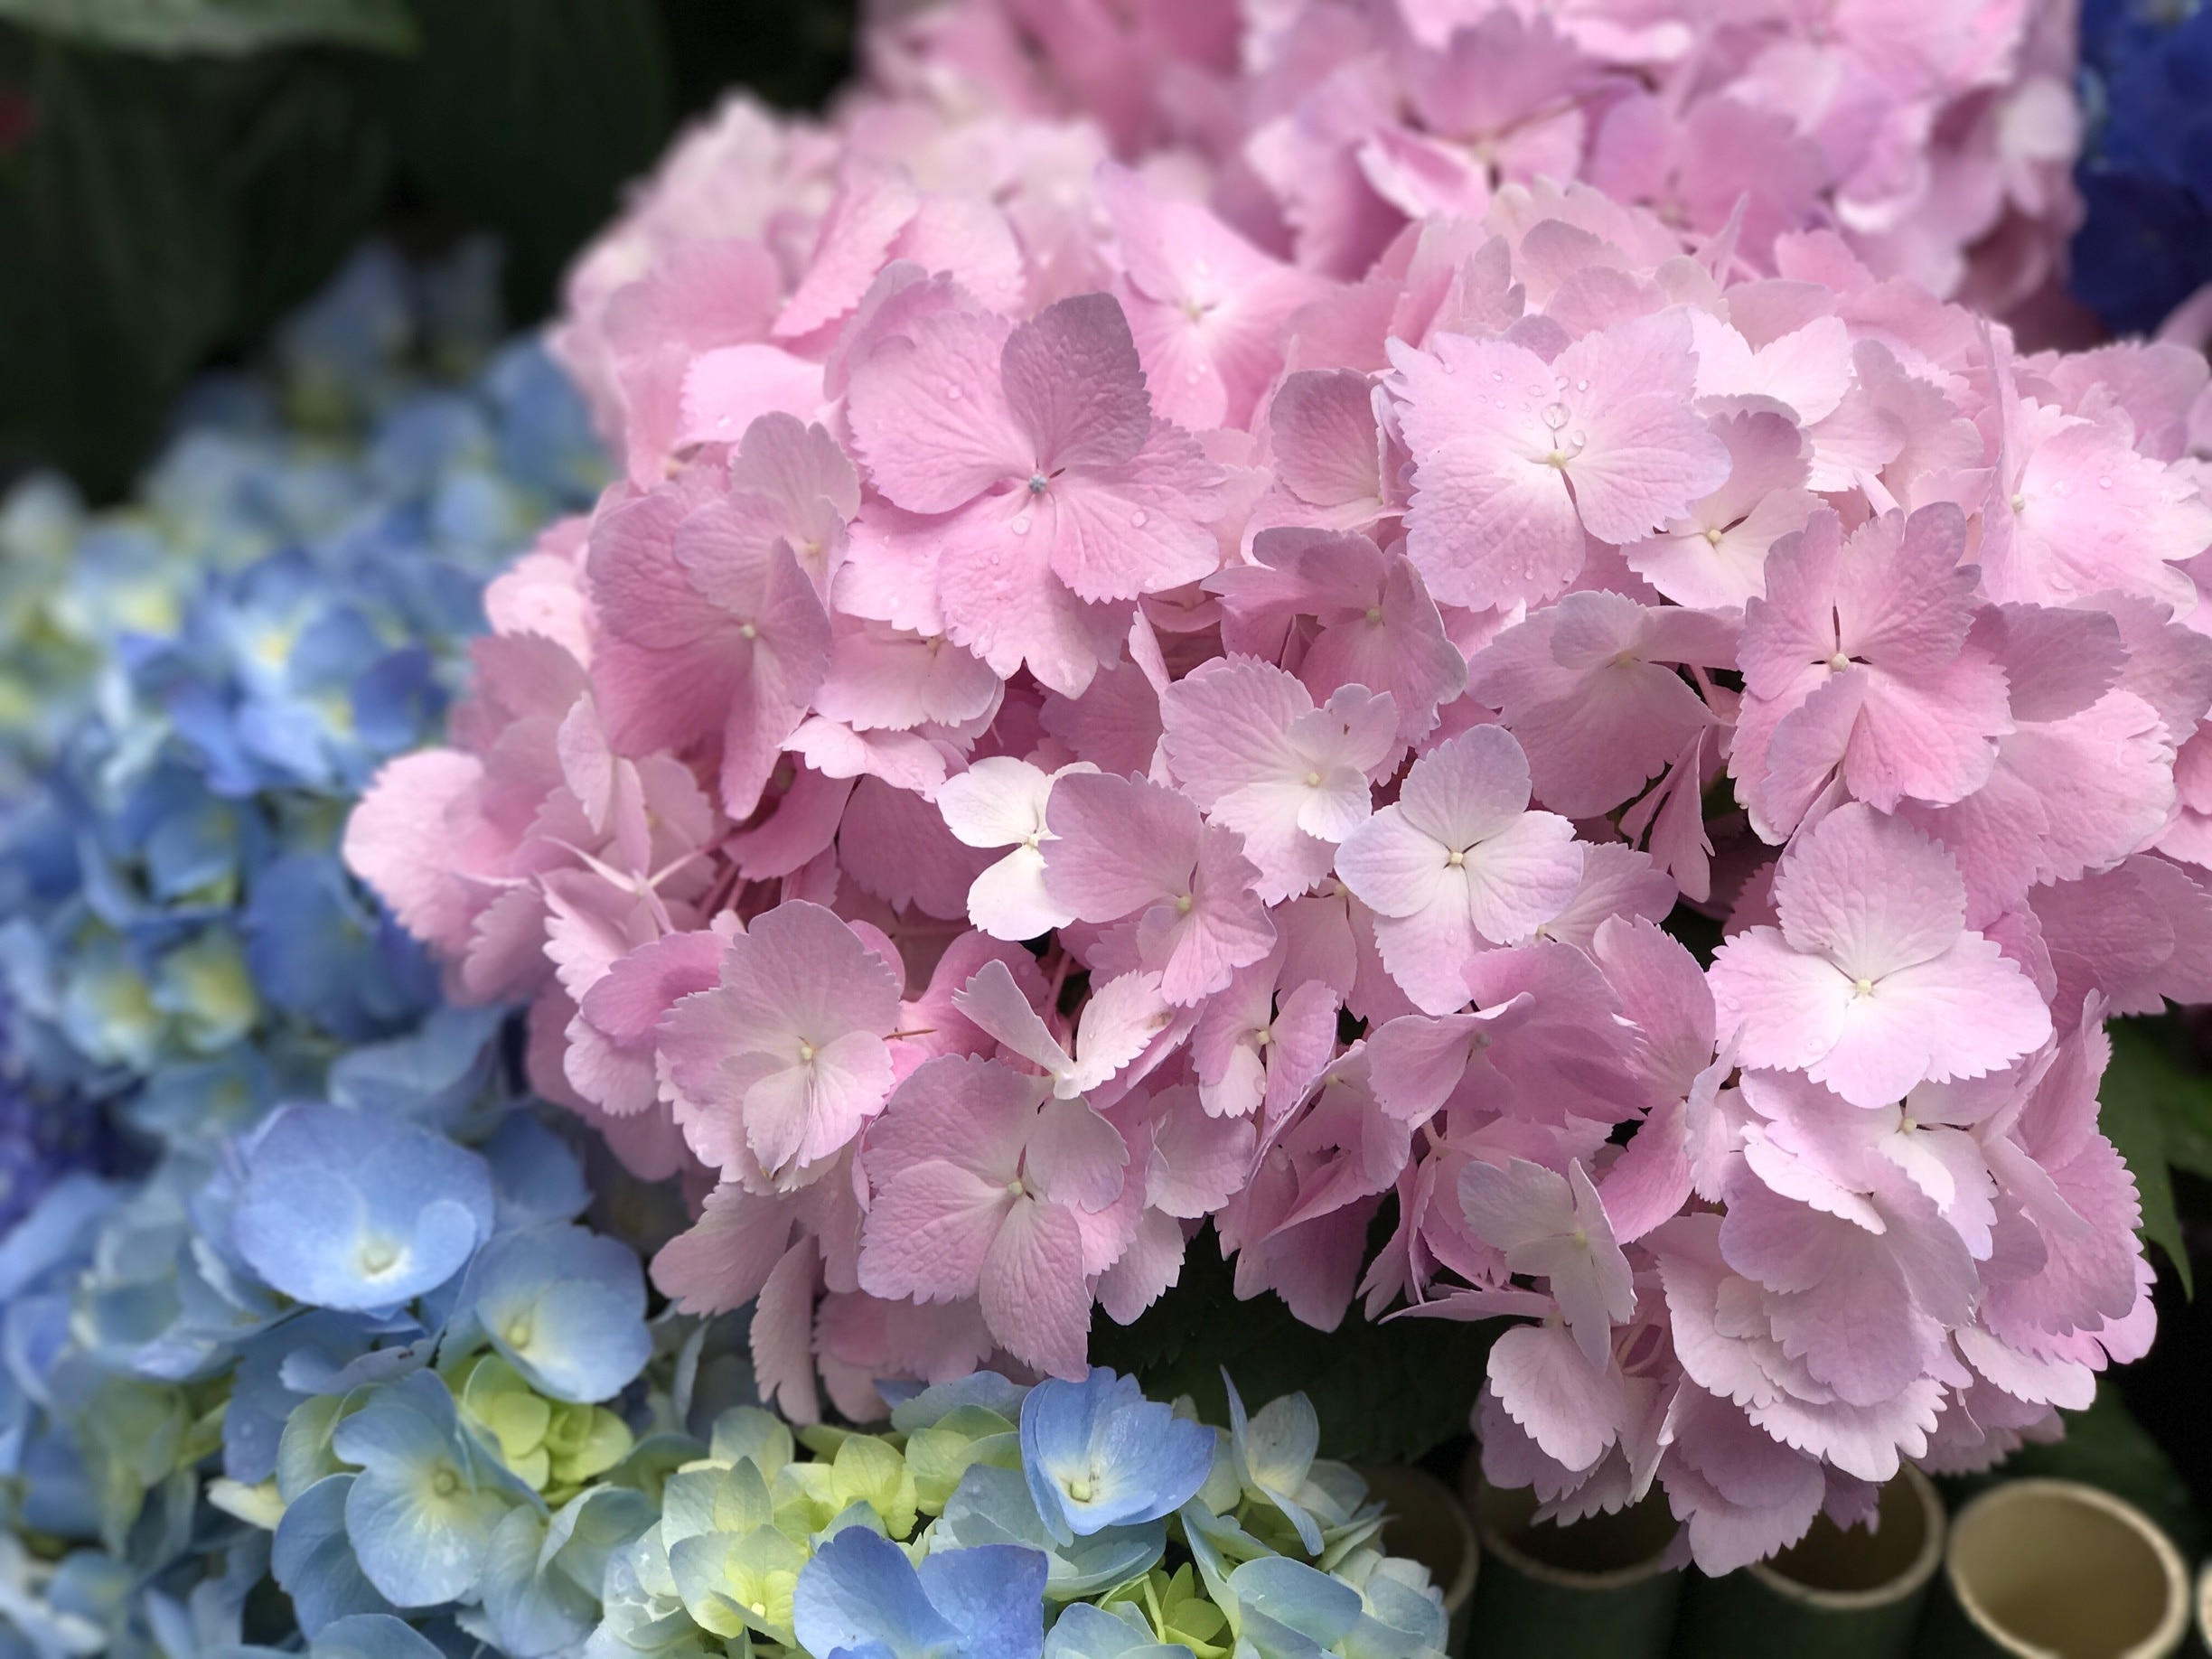 Hydrangeas is very popular in Japan. They can be found in many shrines and homes in Japan.